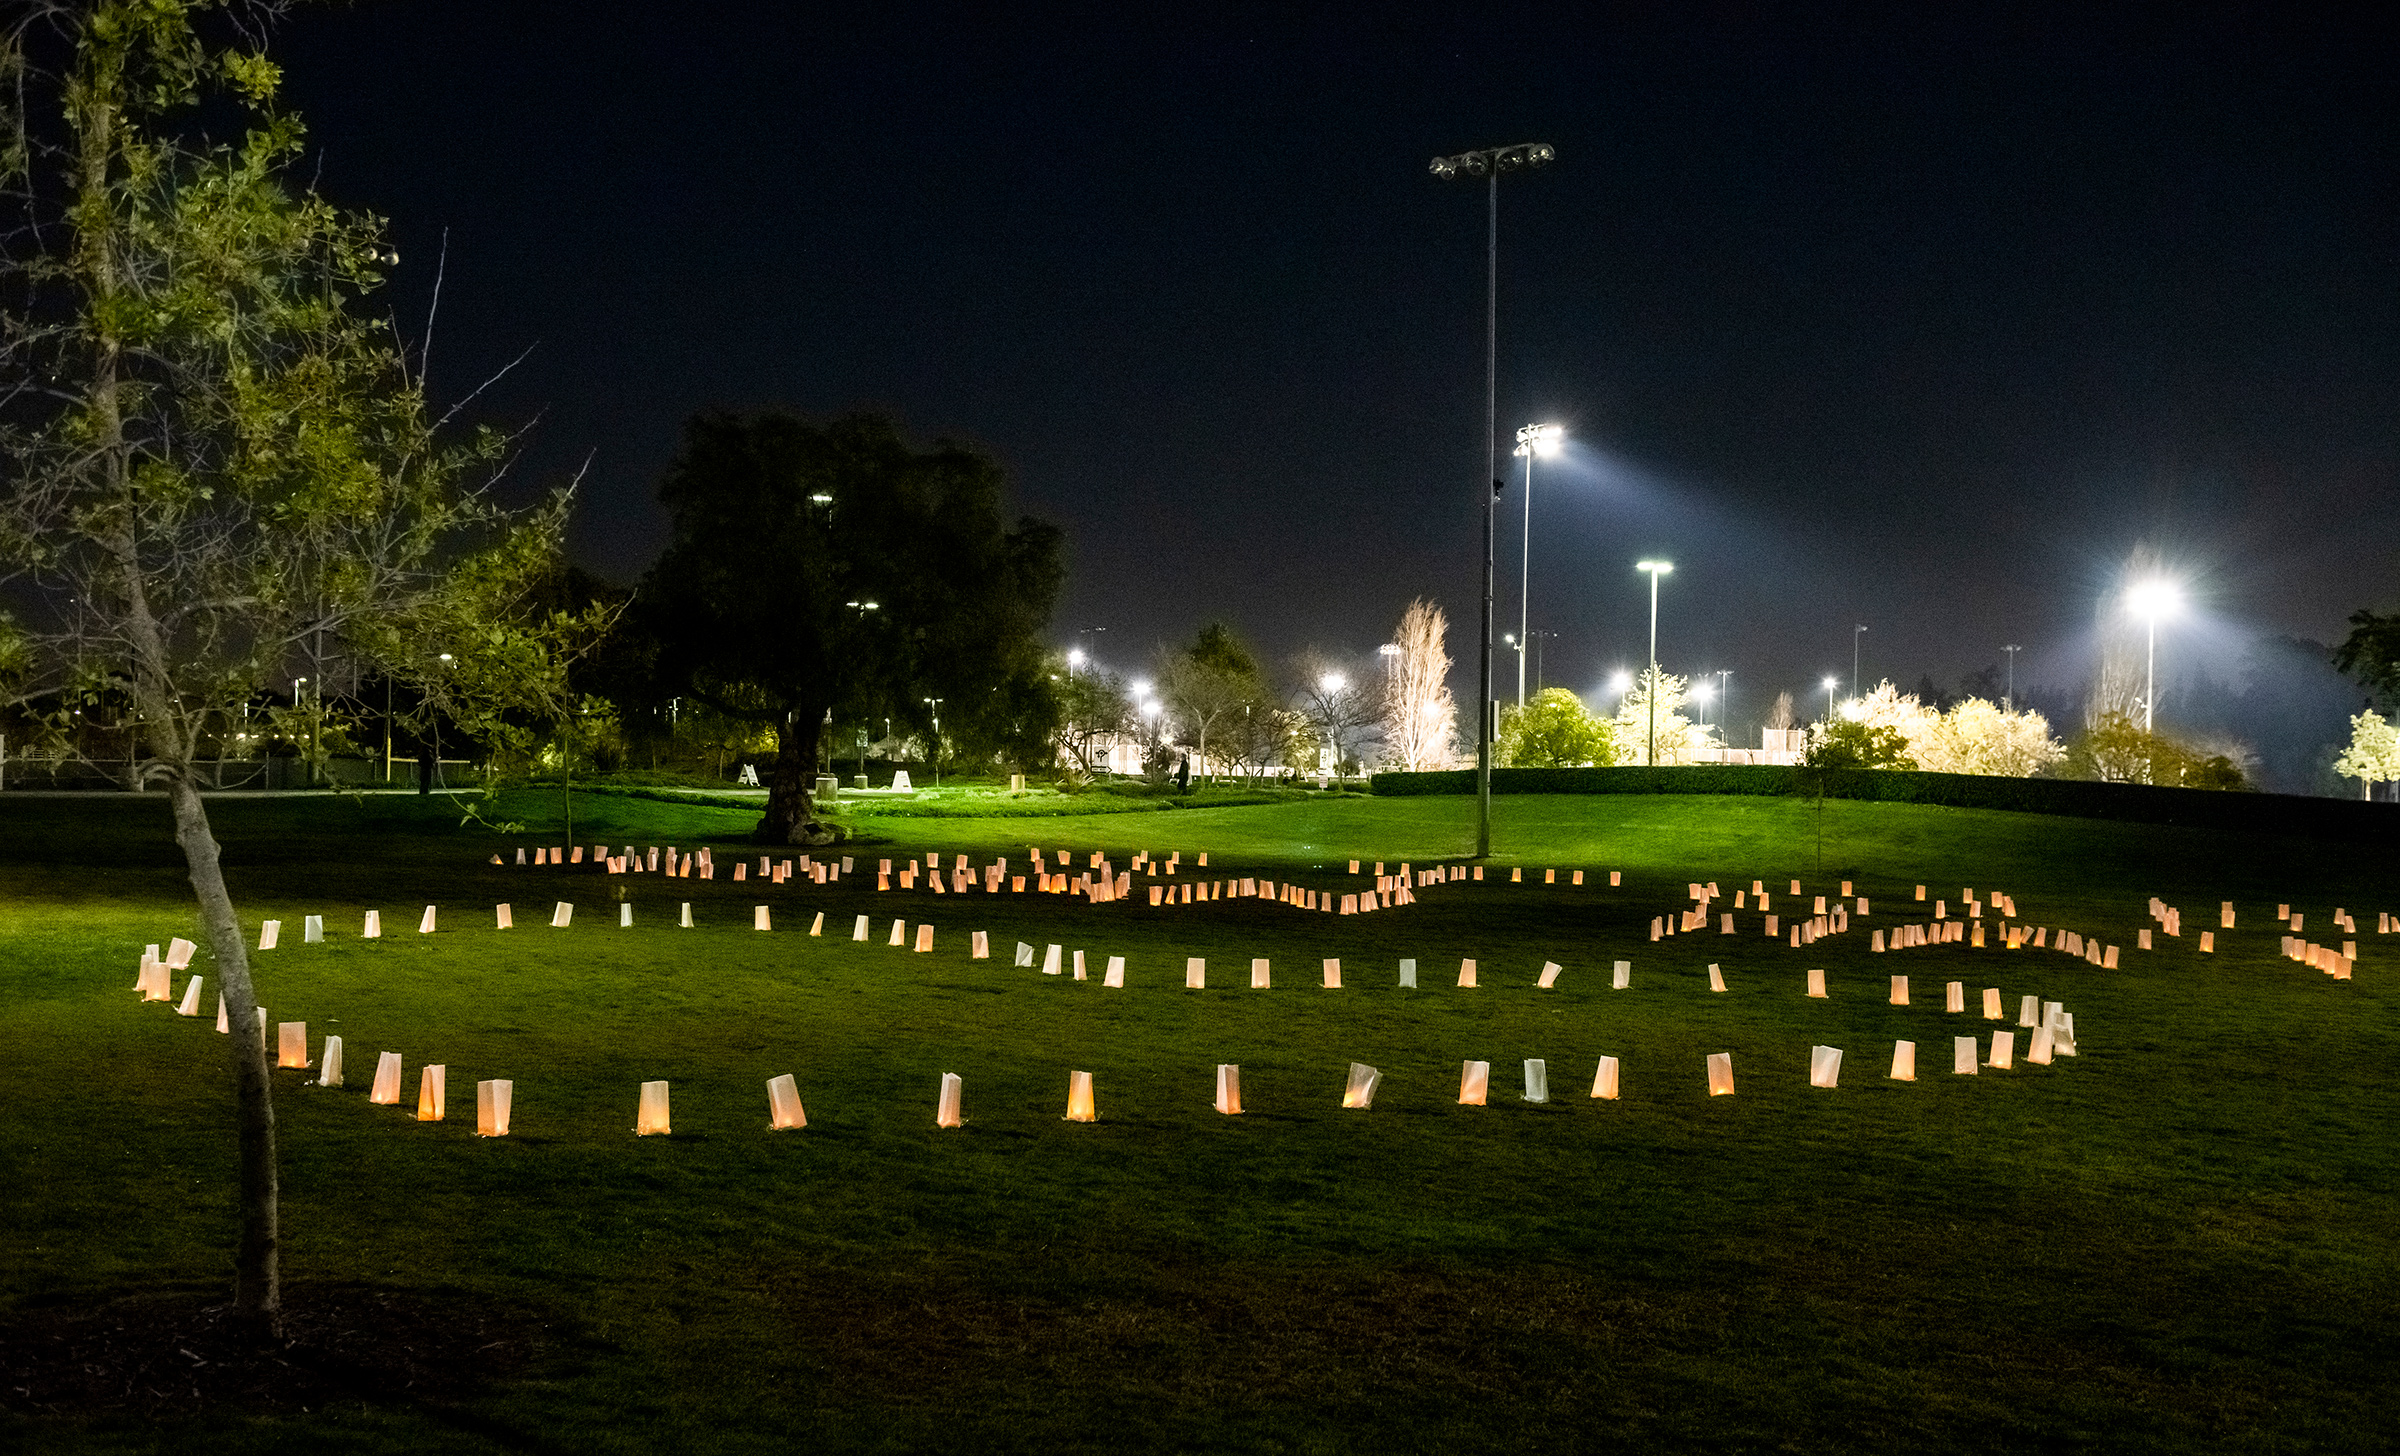 A March 4 candlelit memorial in Fountain Valley, Calif., pays tribute to victims of anti-Asian hate crimes amid the pandemic (Leonard Ortiz—MediaNews Group/Orange County Register/Getty Images)